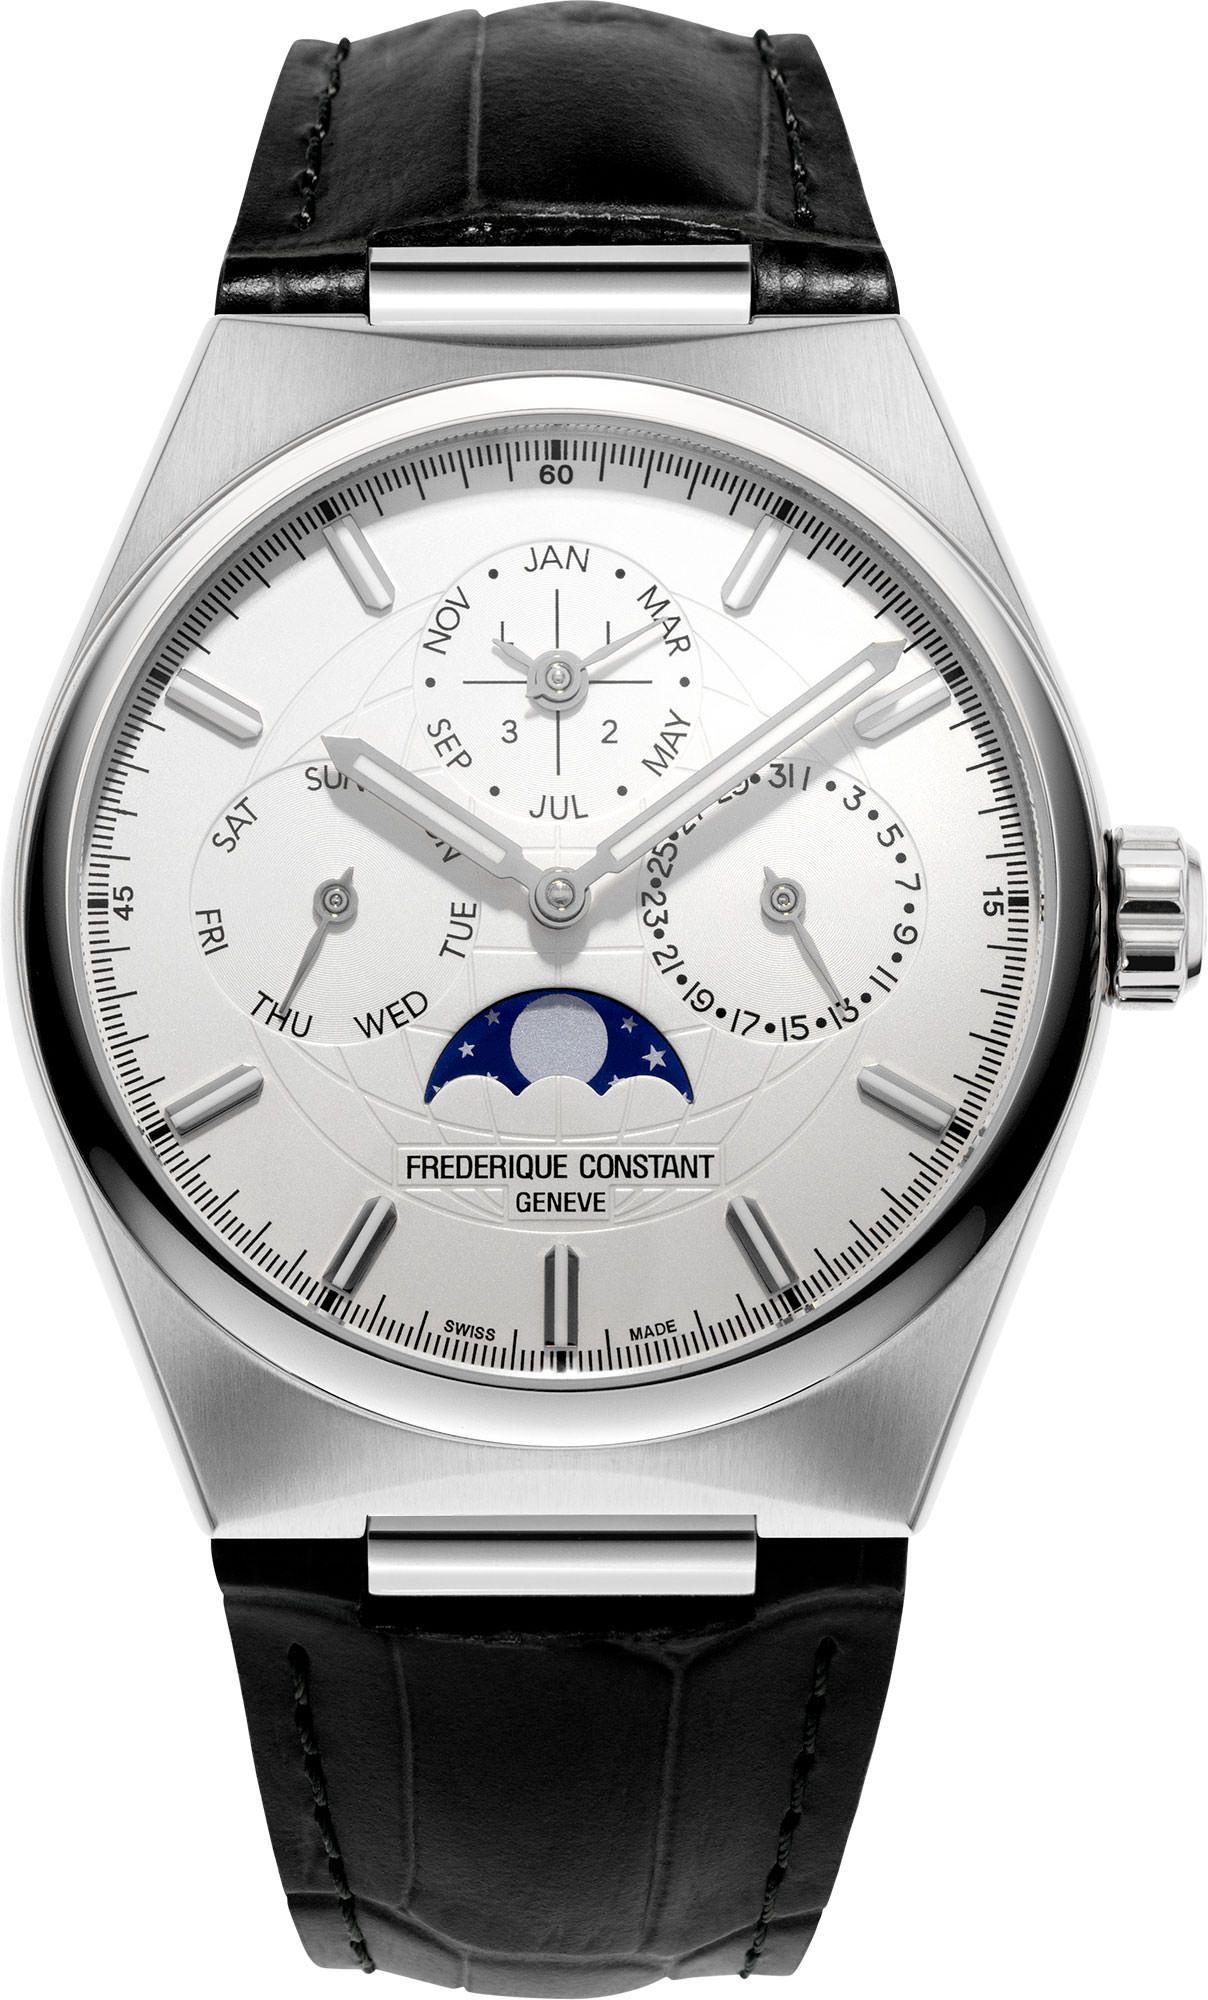 Frederique Constant Highlife Perpetual Calendar Manufacture 41 mm Watch in Silver Dial For Men - 1